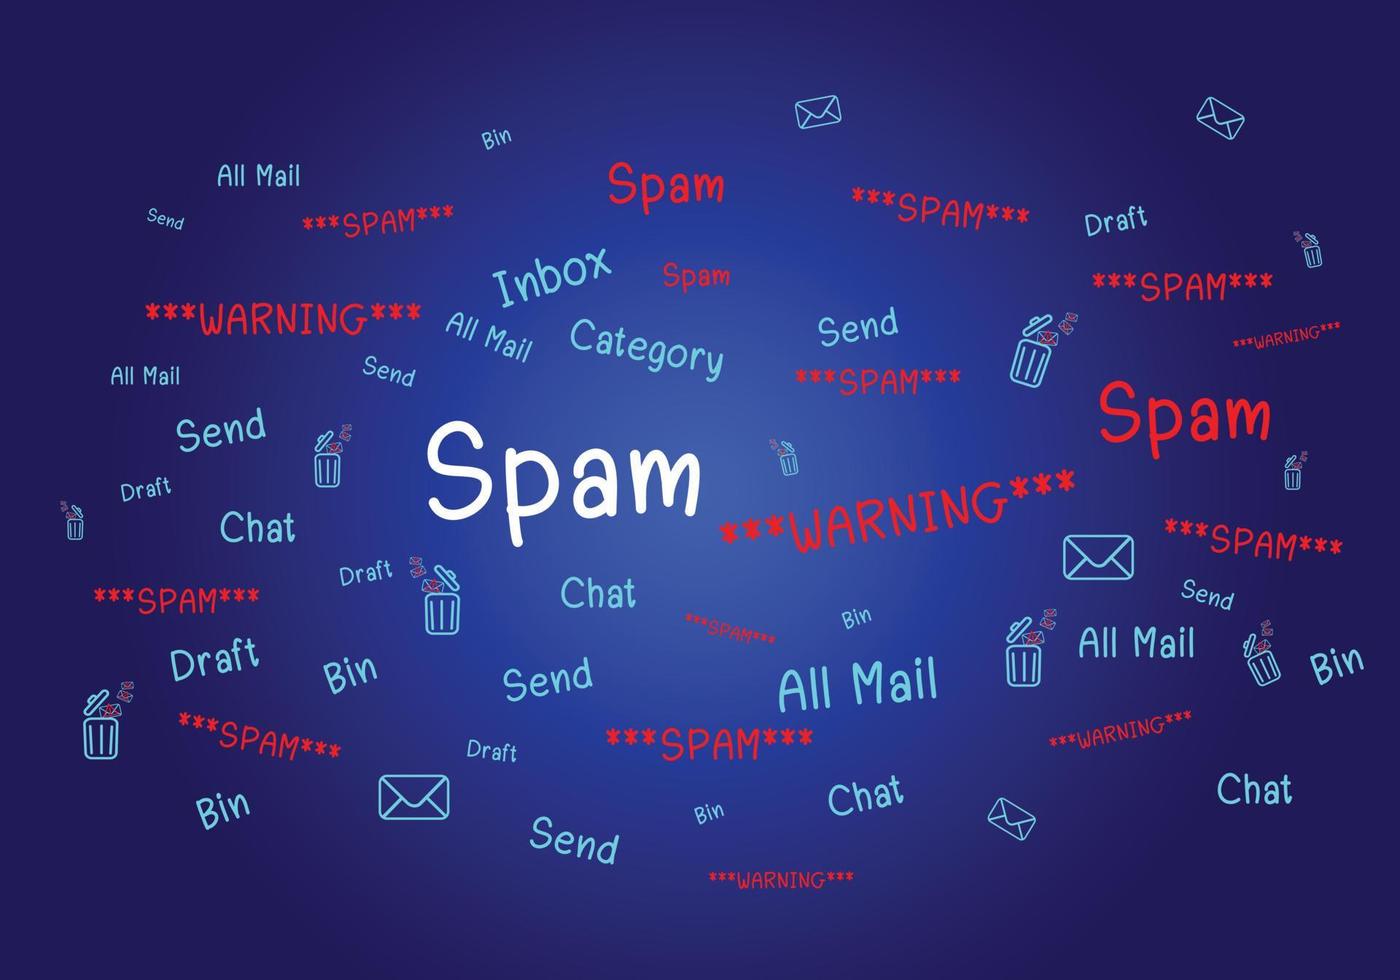 Concept of e-mail and computer viruses. Review the concepts of internet security, spam and e-marketing on screen. Spam email pop-up warnings. vector